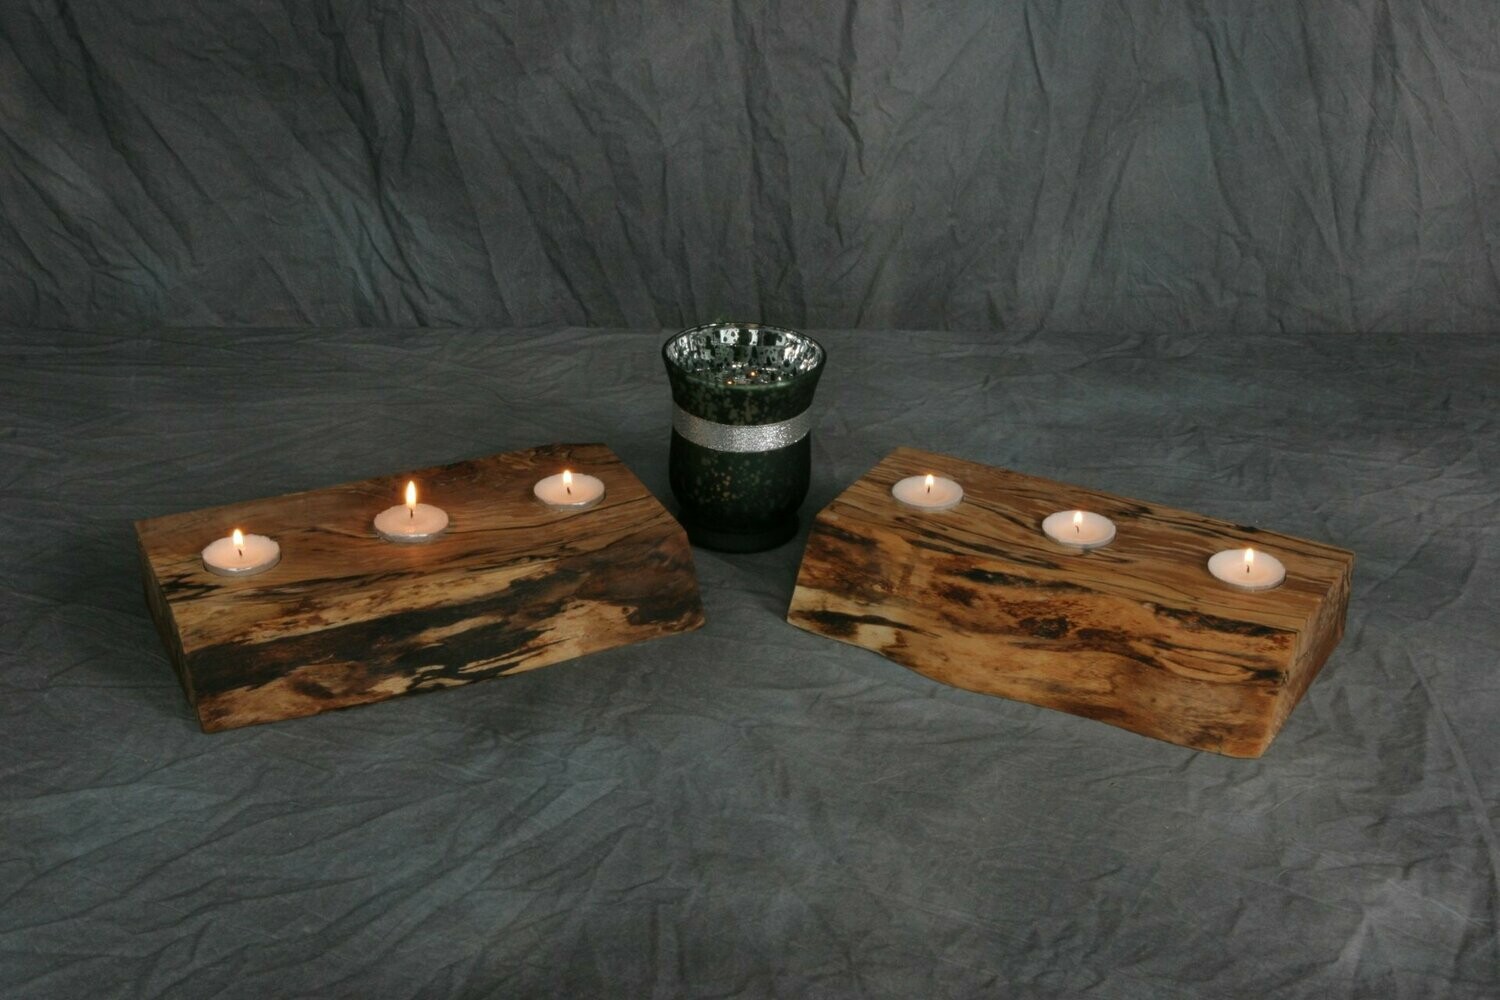 Live Edge Tea Light Candle Holder (3 Candles included)